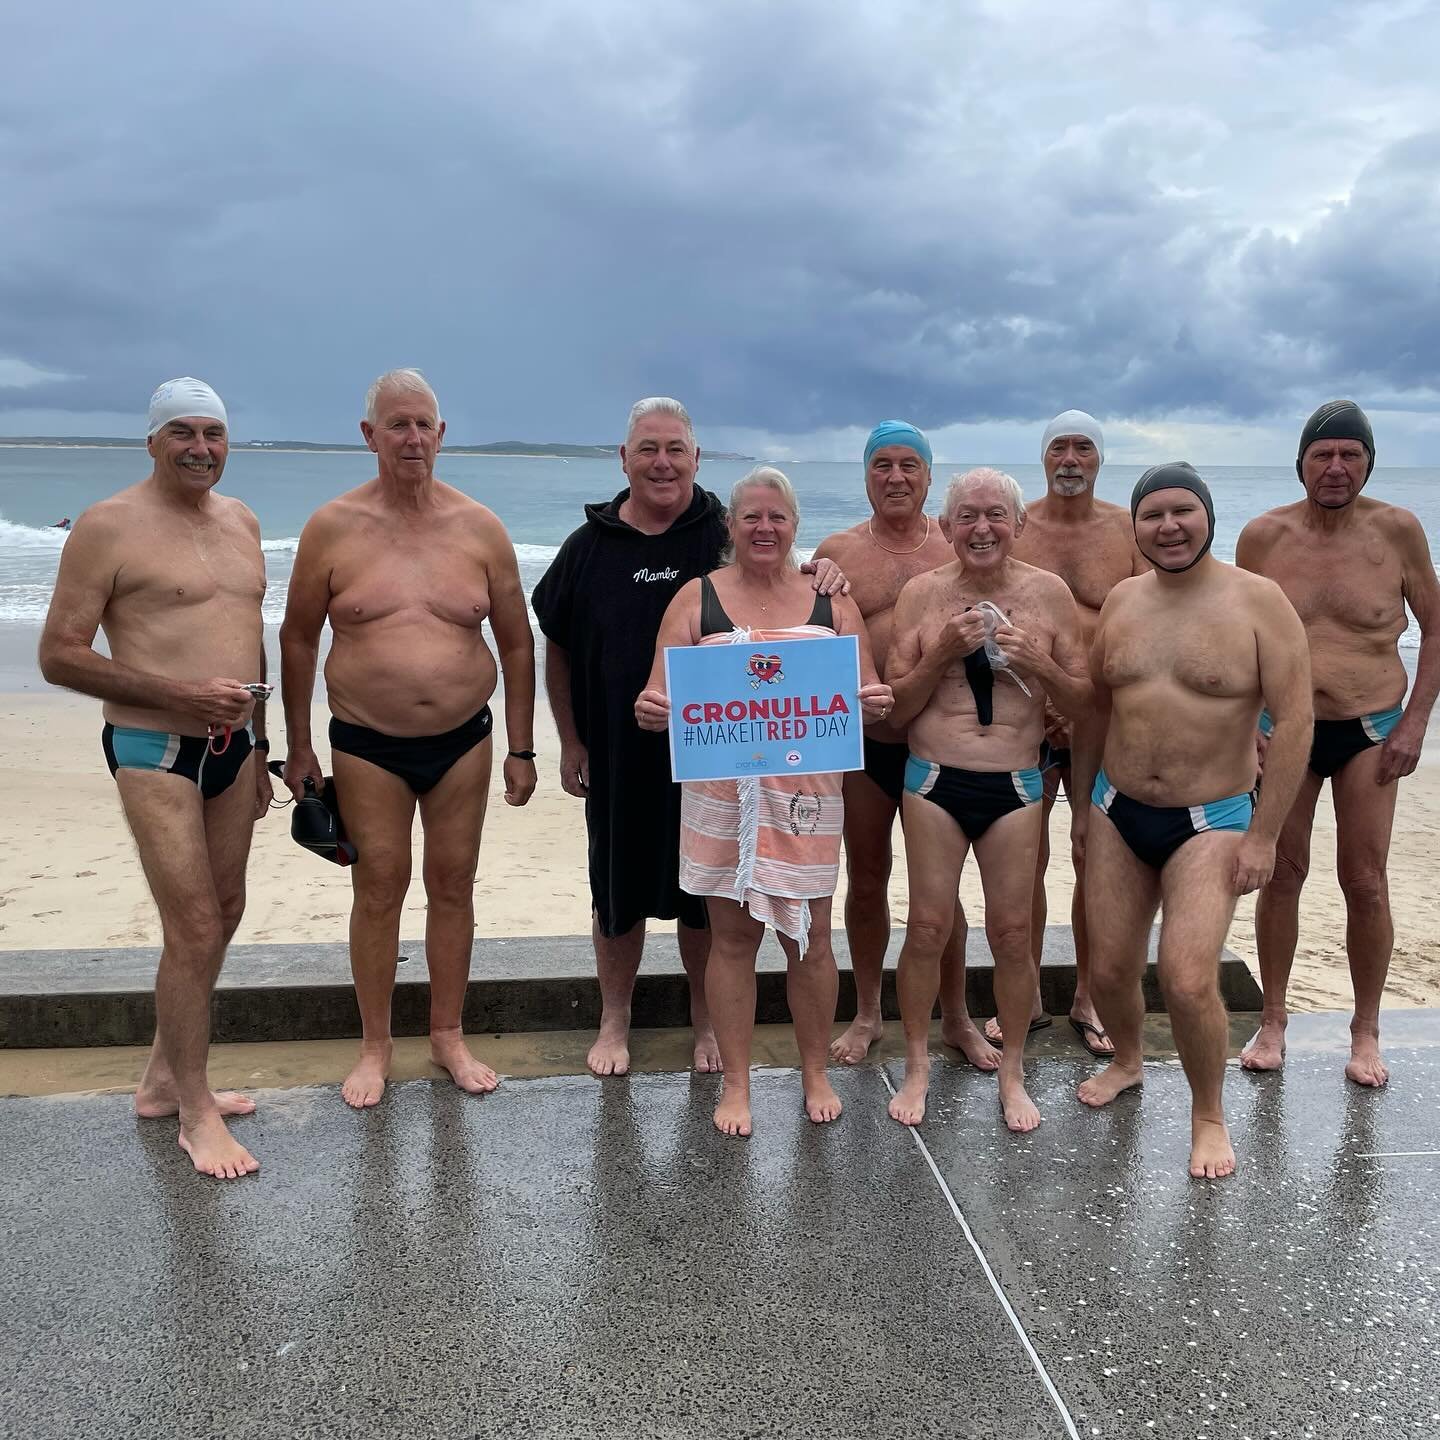 Thank you to our community for helping #MakeItRed in Cronulla 💙💛❤️

🫶Sadly, one Australian dies of heart disease every 12 minutes.

🩺 We&rsquo;ve recruited @heartbeatofsportau to provide @victorchanginst heart health testing to our community . @h